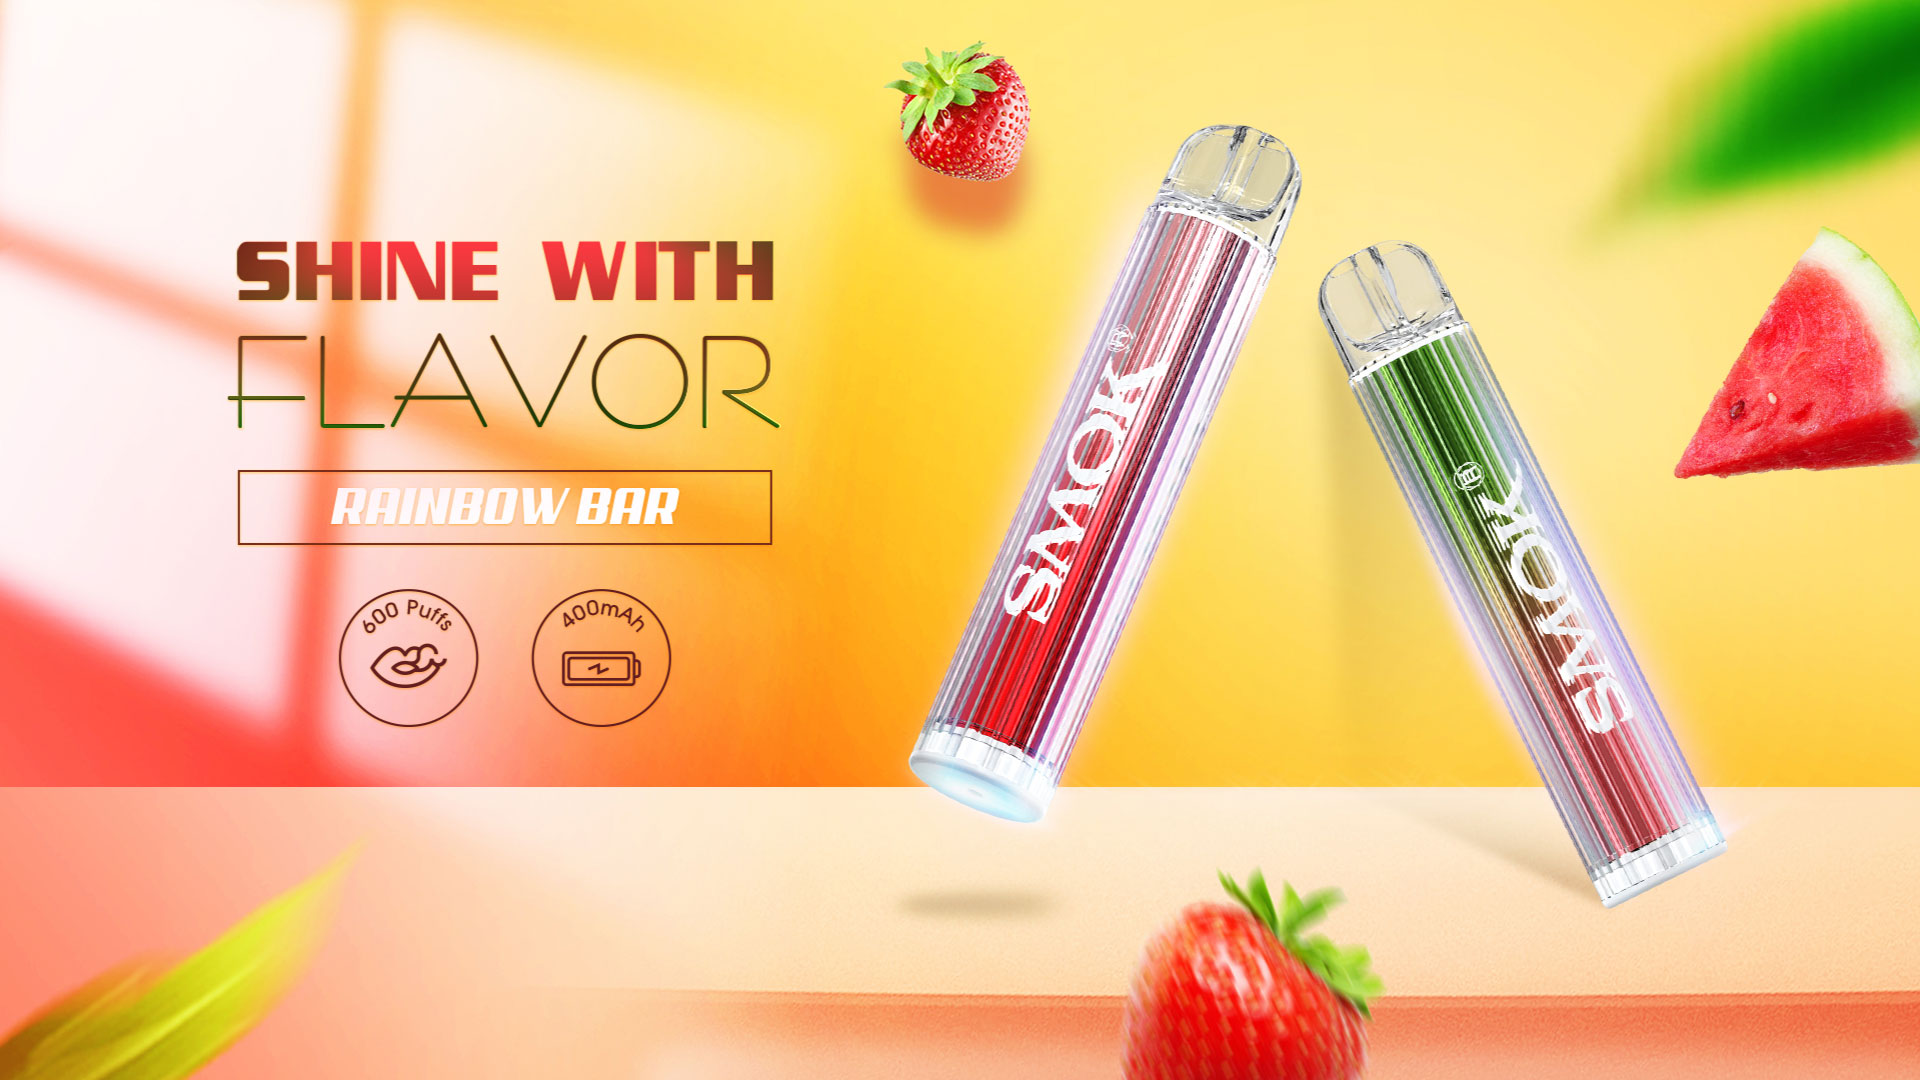 You are currently viewing RAINBOW BAR 600puffs Disposable vape the device that lights up No need to refill or recharge